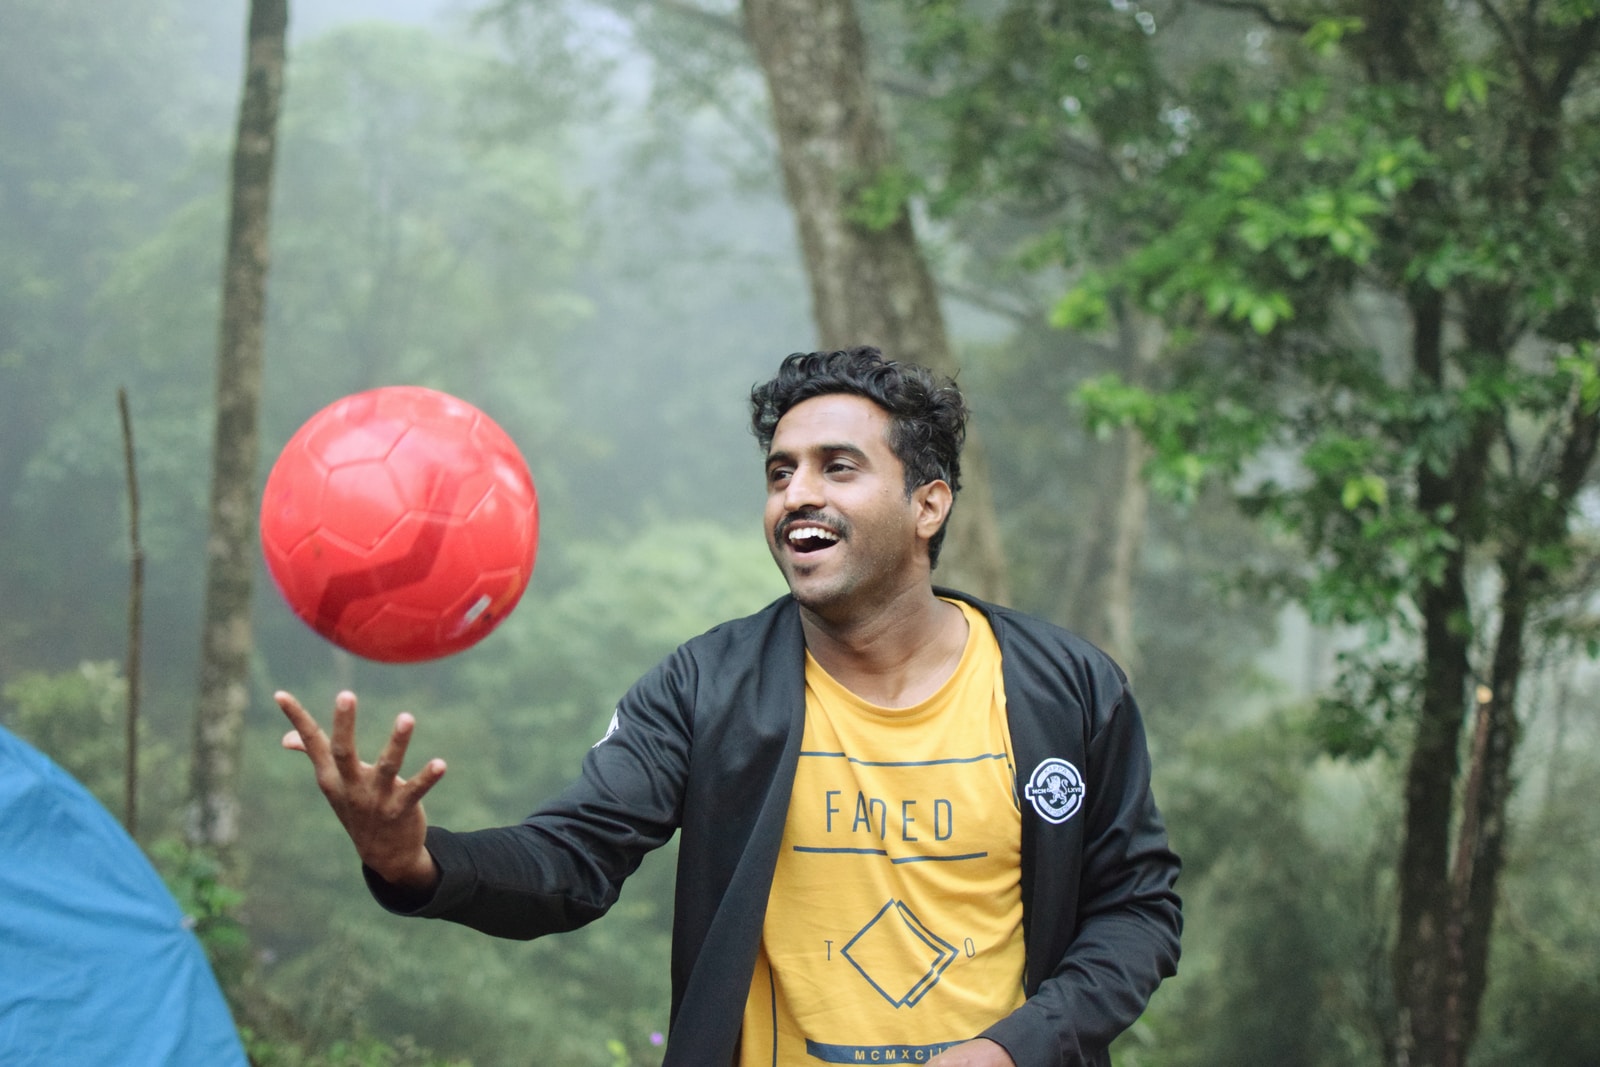 man playing red soccer ball